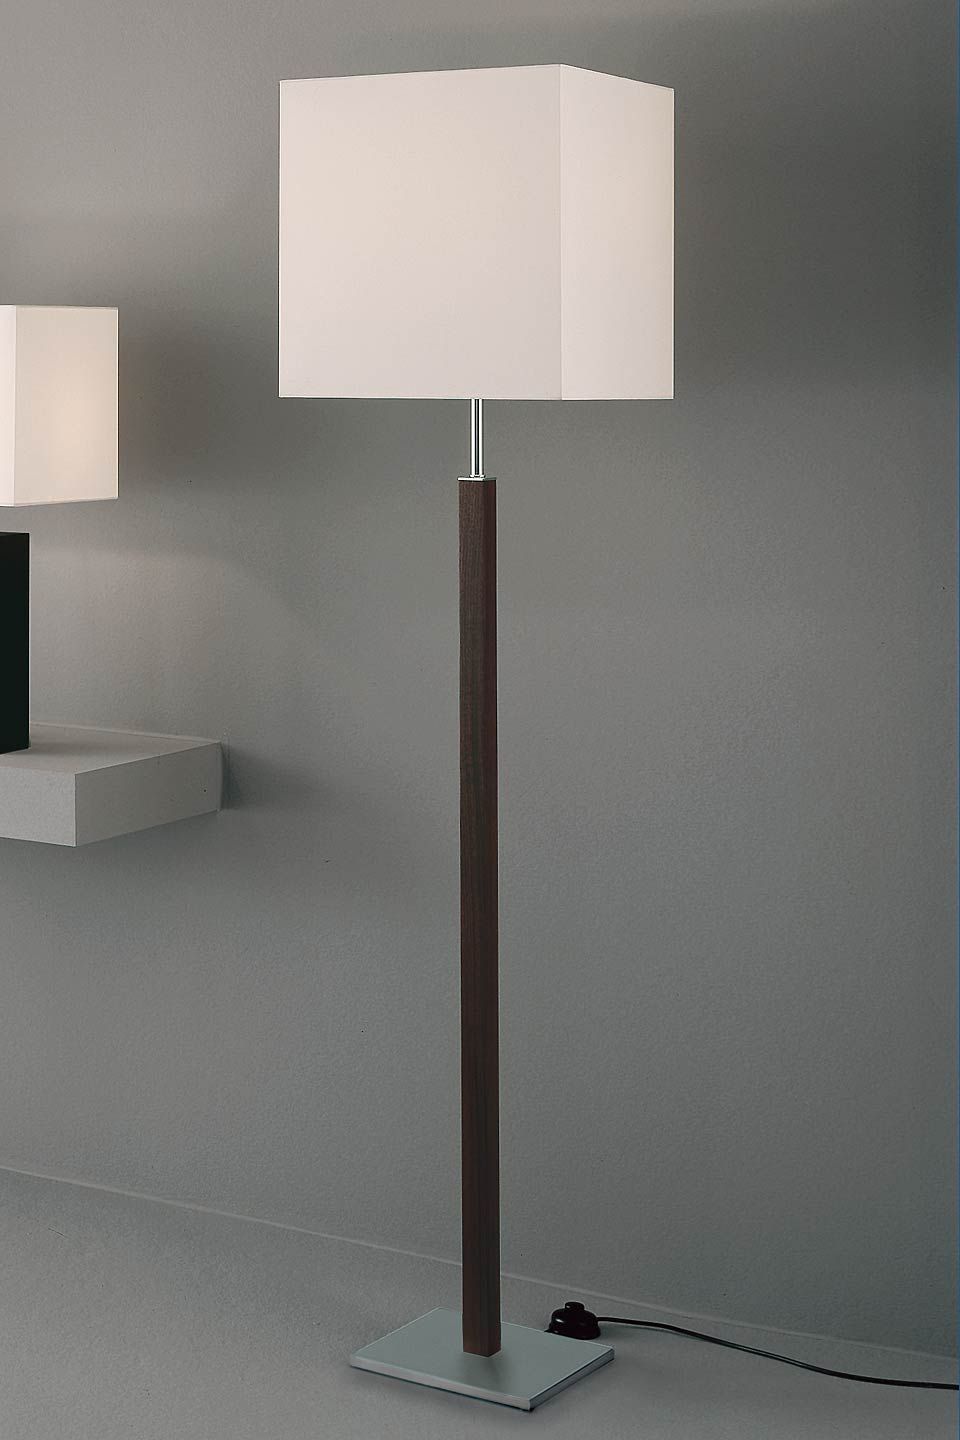 Most Recent Walnut Standing Lamps Inside Floor Lamp With Square Pedestal. Two Coordinated Lamps Available: Baulmann  Leuchten Luxury Lightings Made In Germany – Réf (View 5 of 15)